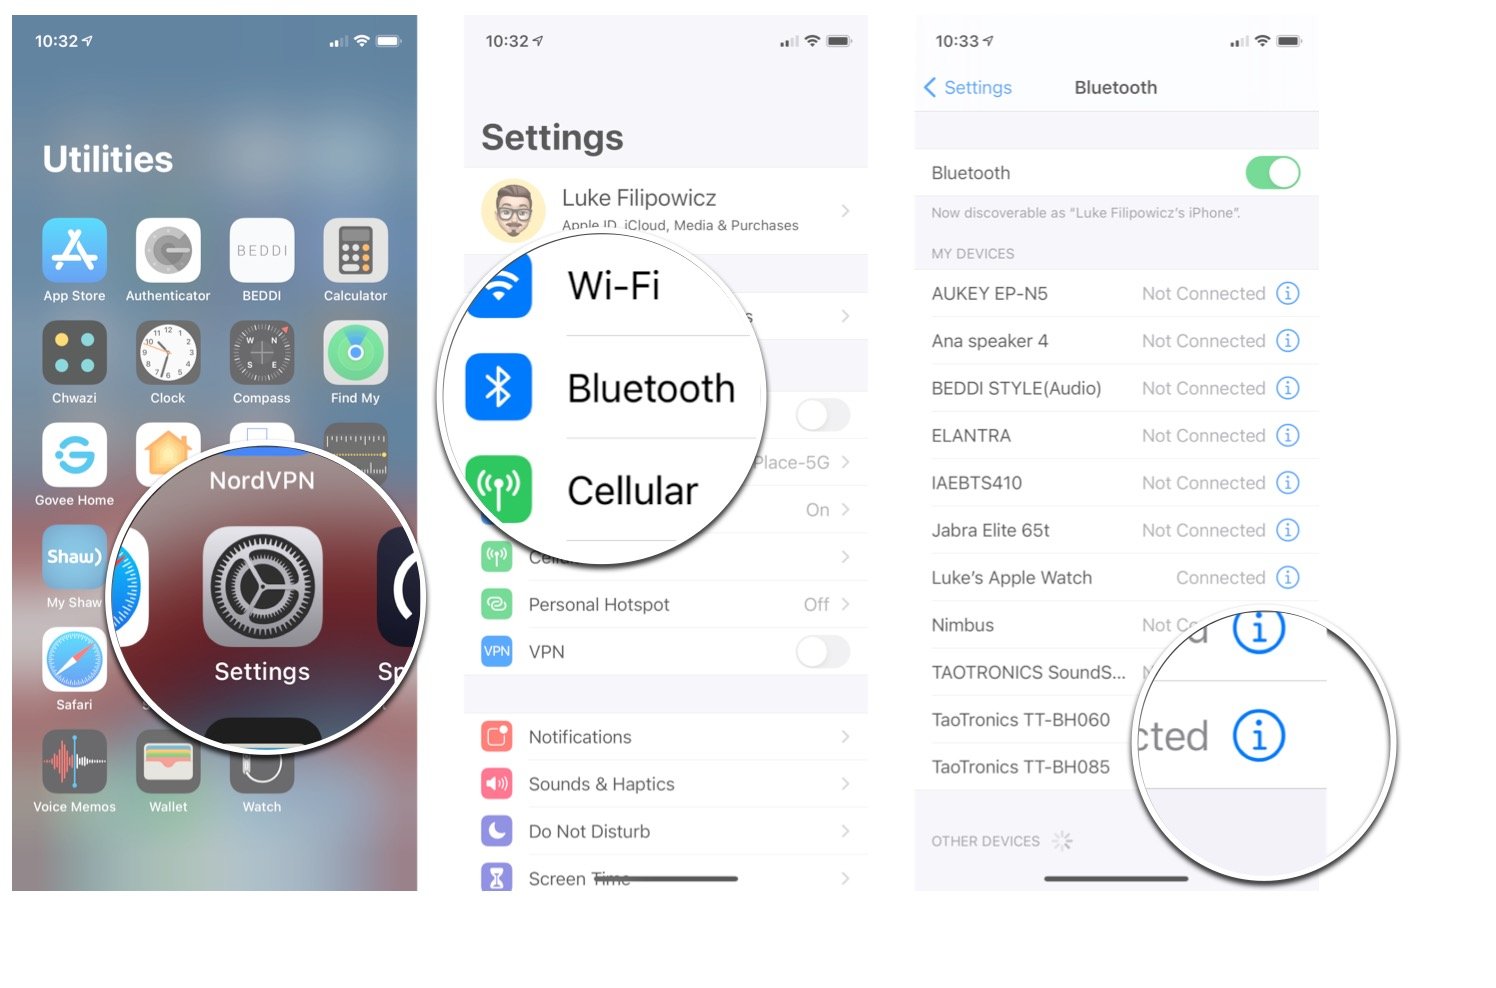 Opening Bluetooth Settings in iOS: Launch Settings from the Home screen, tap Bluetooth, and then tap the information button beside the device you want to classify. 